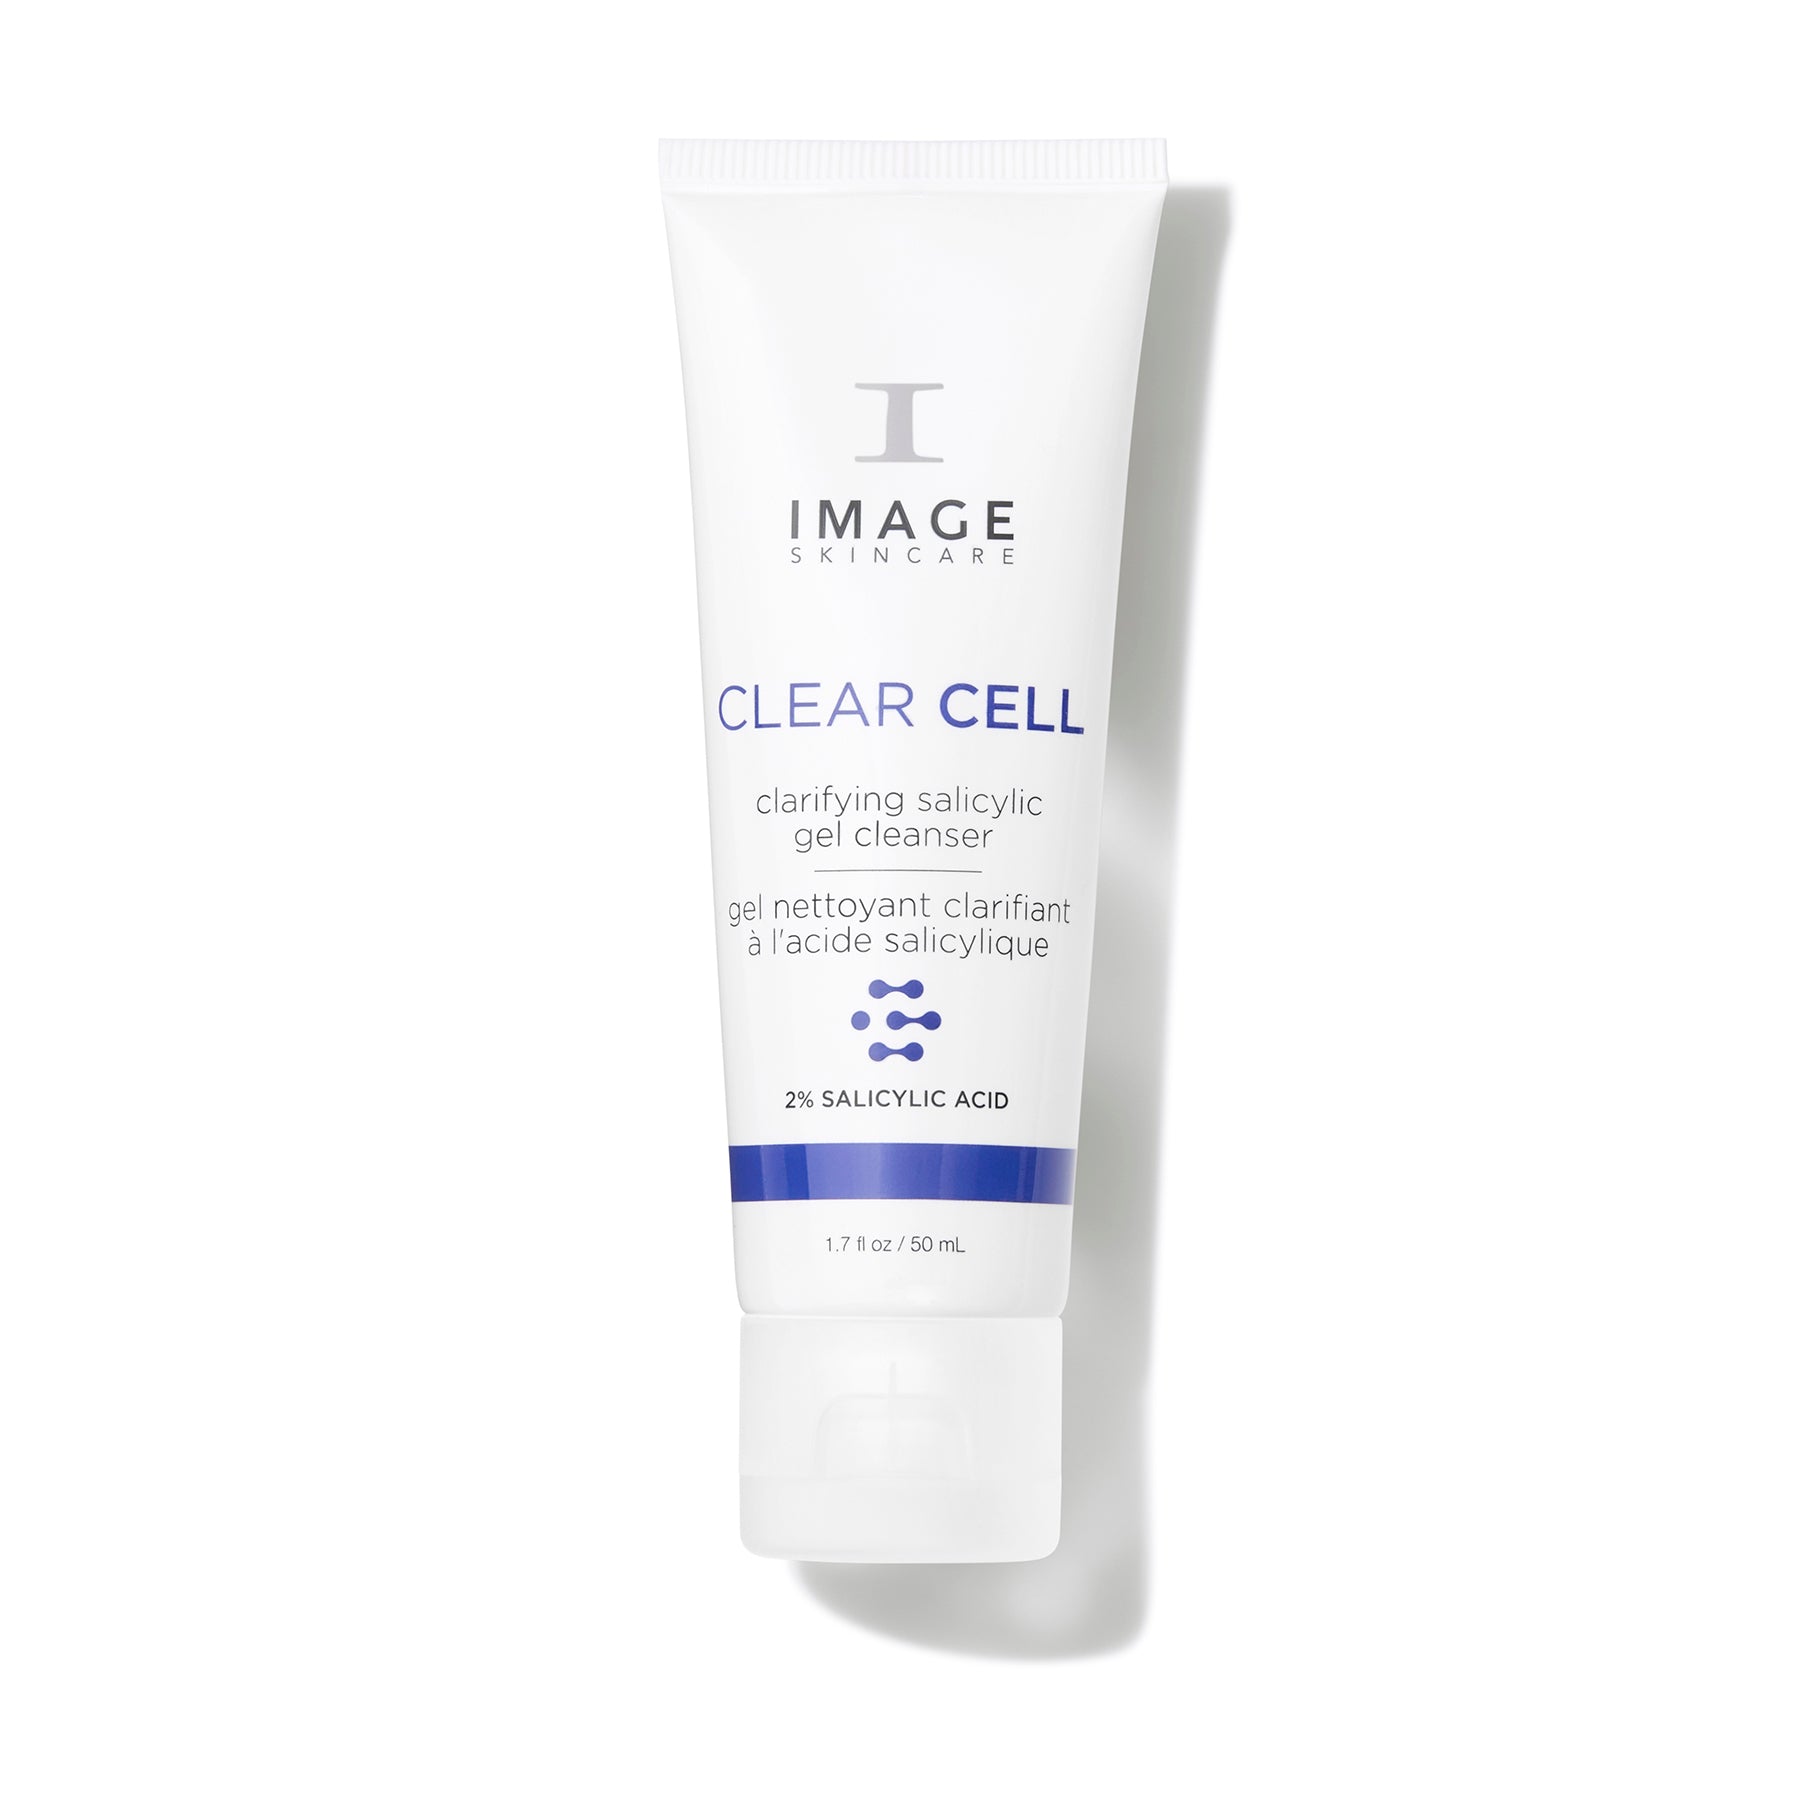 CLEAR CELL clarifying salicylic gel cleanser discovery-size